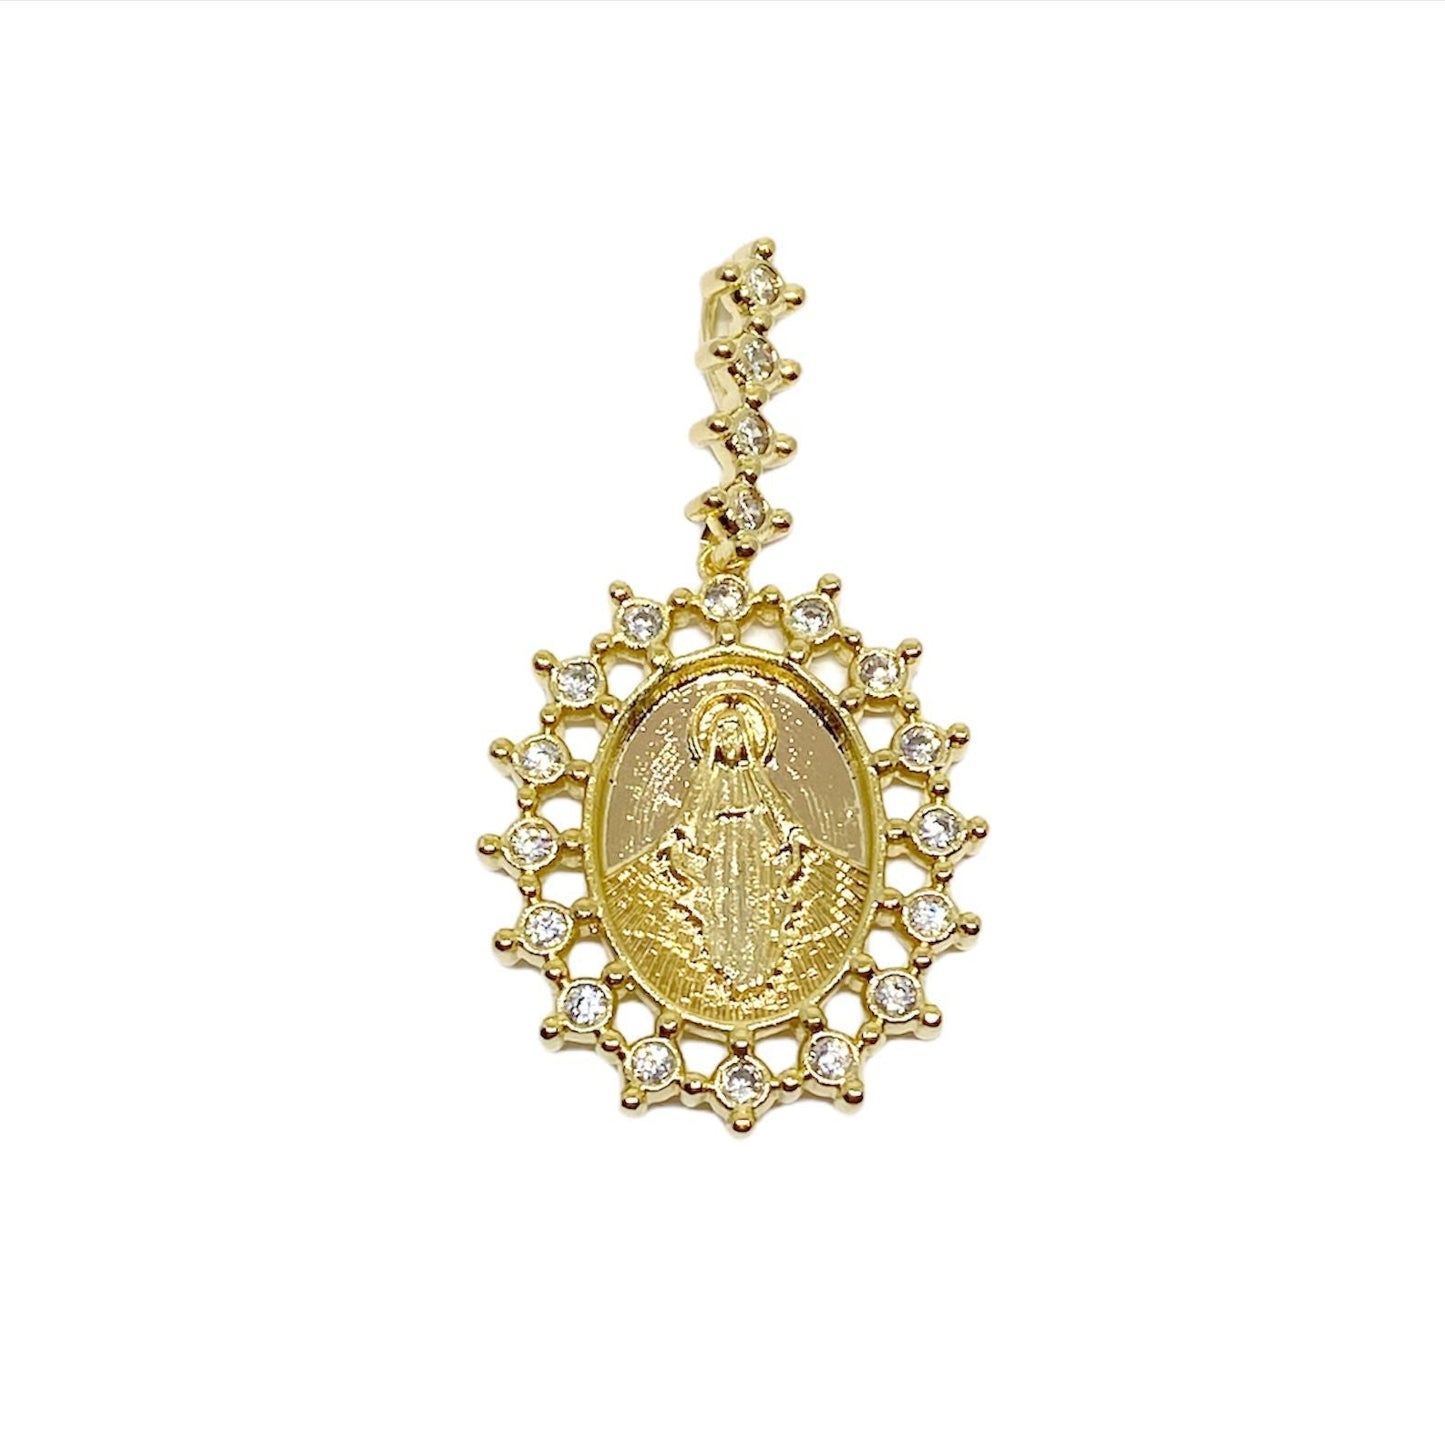 GoldFi 18k Gold Filled Double Sided Lady Mother of Grace Pendant